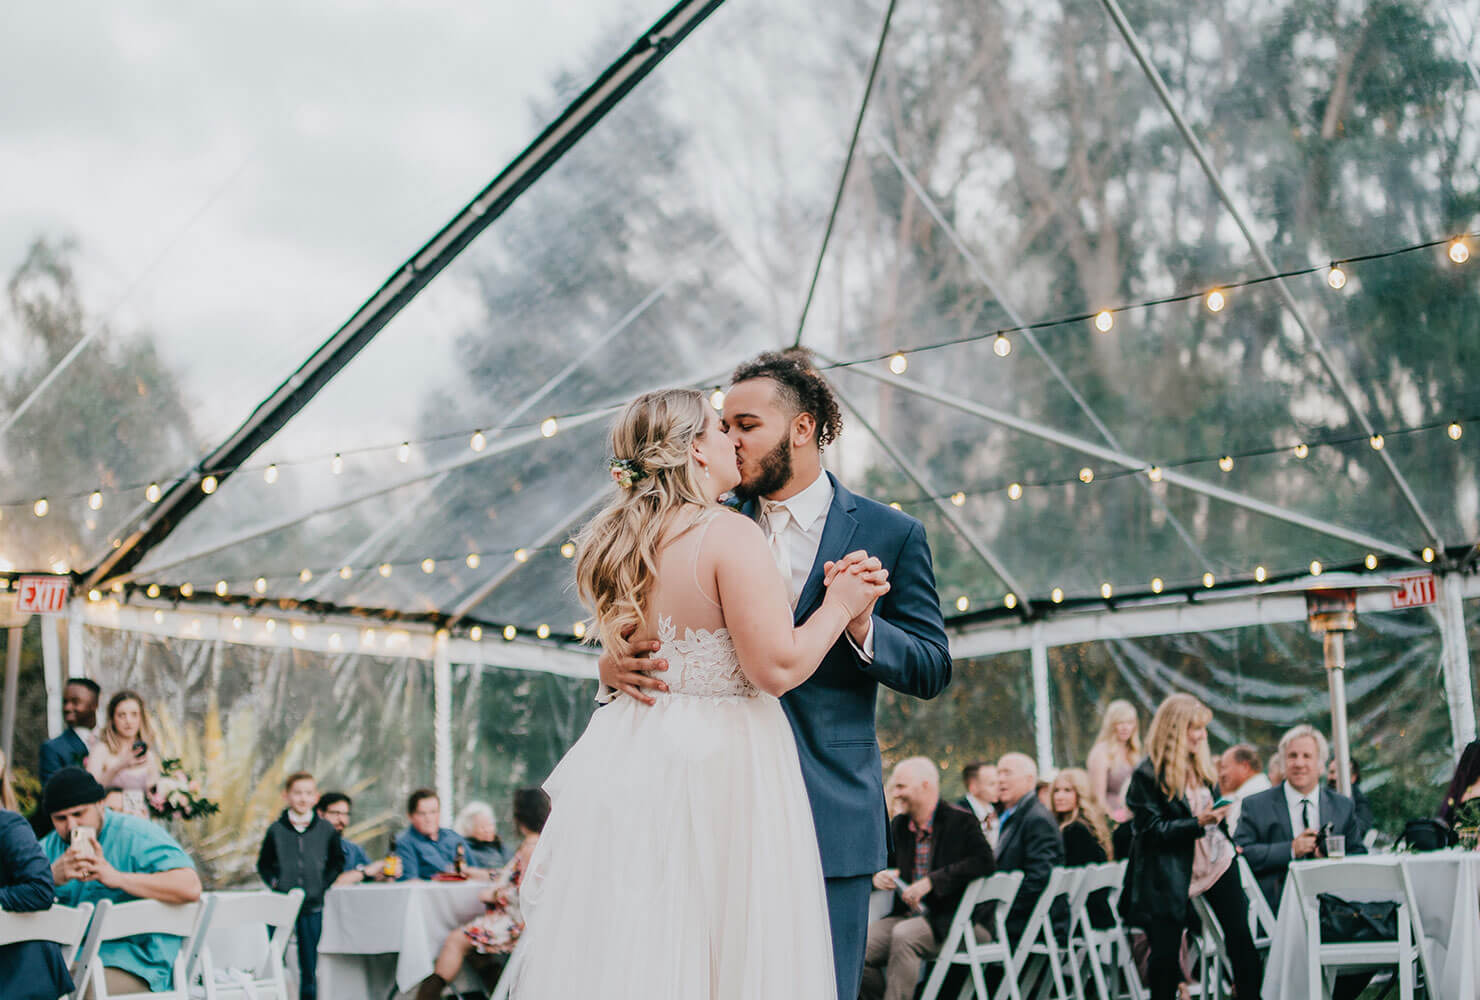 Couple during their first dance under a clear tent surrounded by guests.